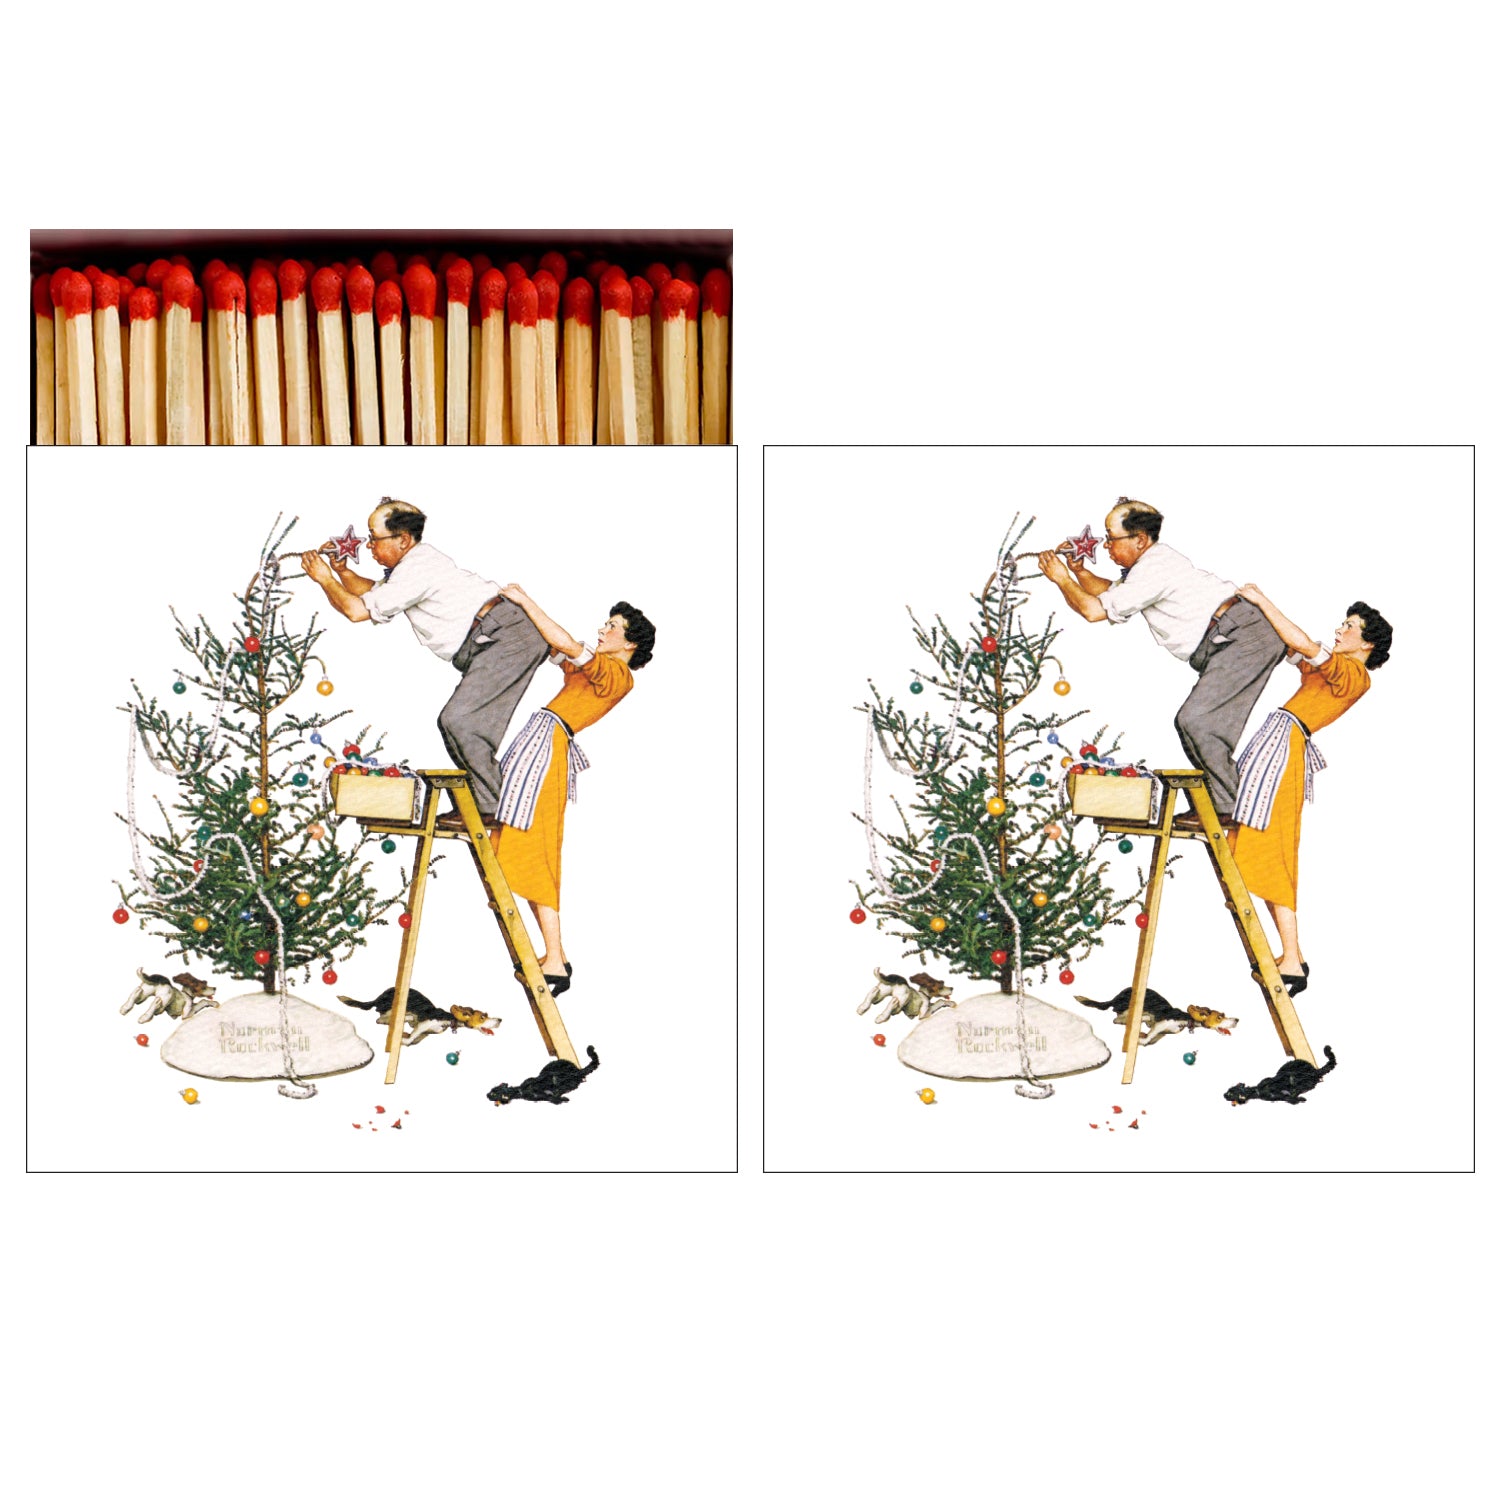 Hester &amp; Cook captures the holiday season with their iconic image of a man on a ladder carefully decorating a Christmas tree using Trimming the Tree Matches.